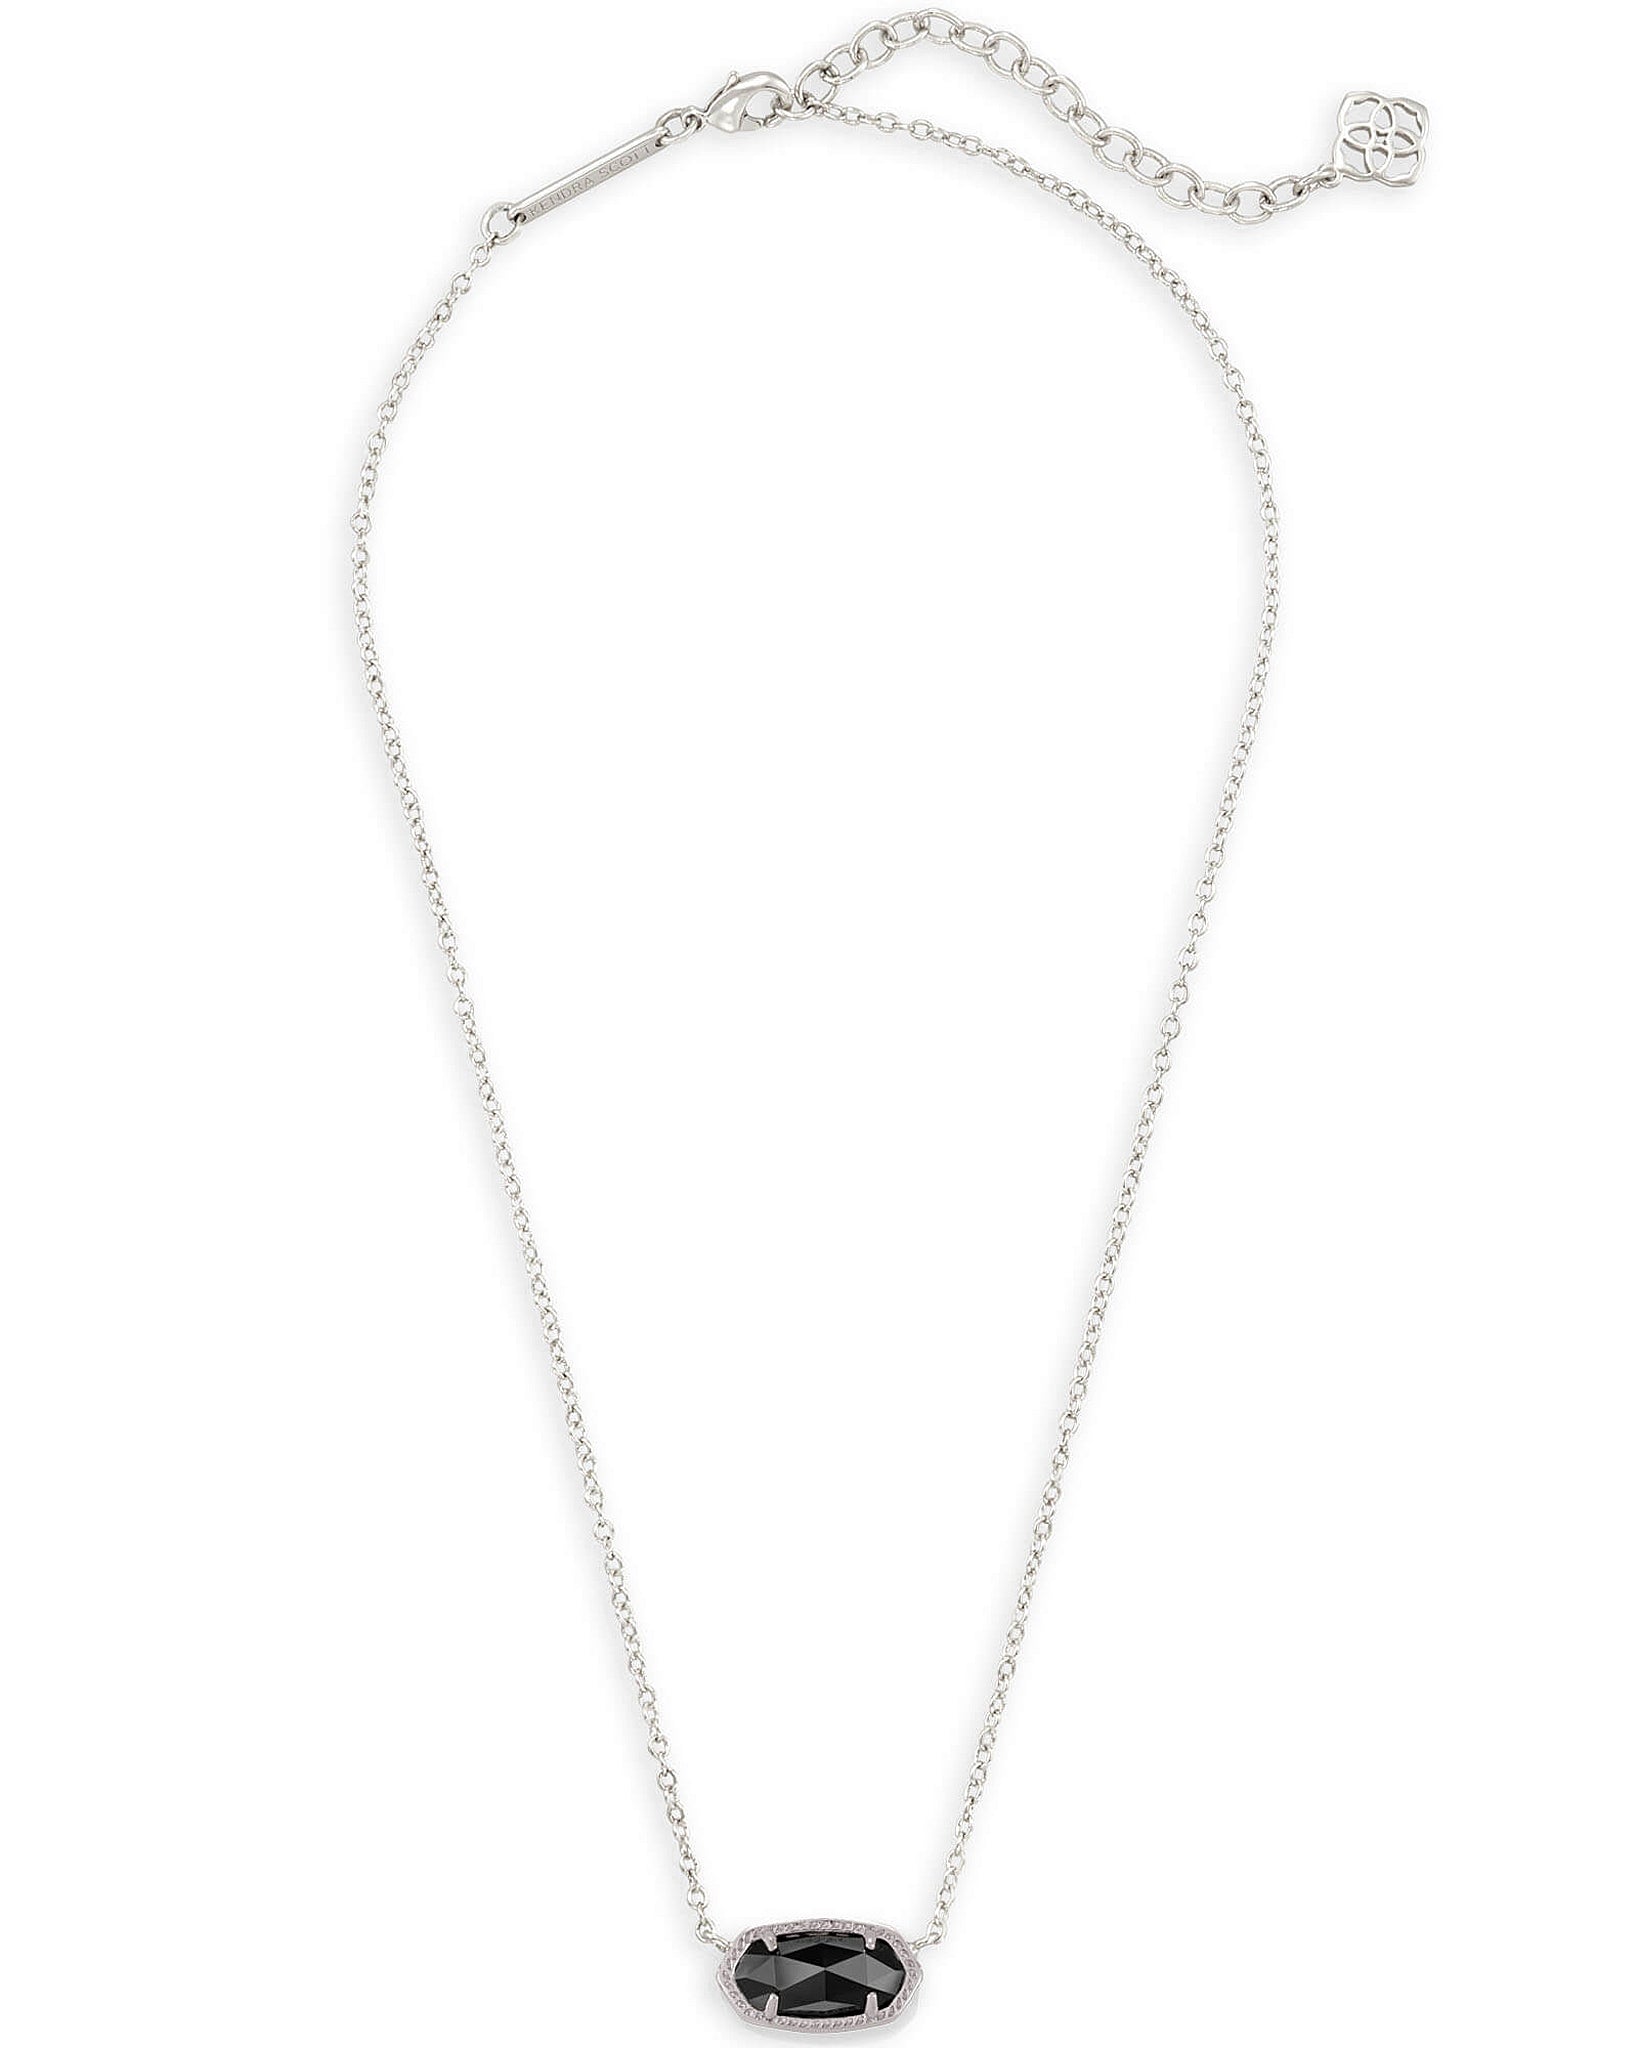 Kendra Scott Elisa Oval Pendant Necklace in Black and Rhodium Plated